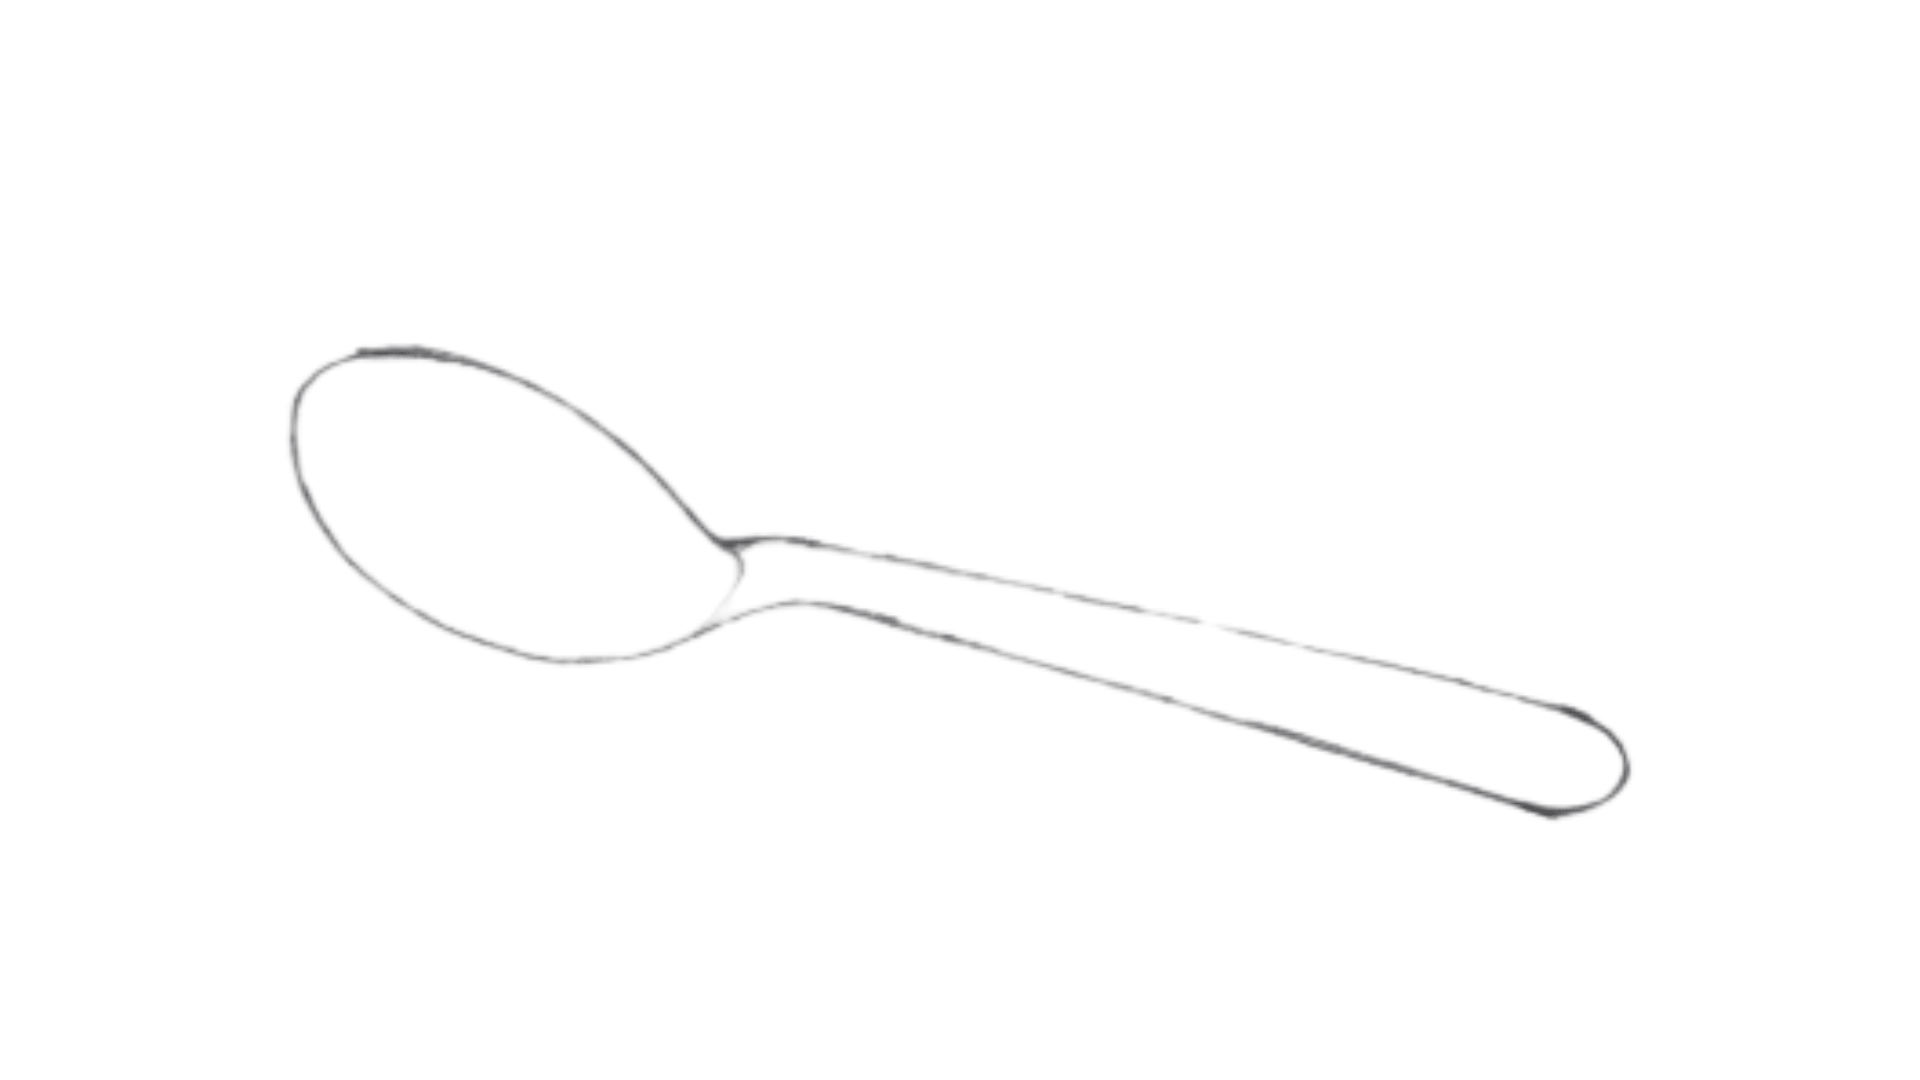 How To Draw Spoon Step 4